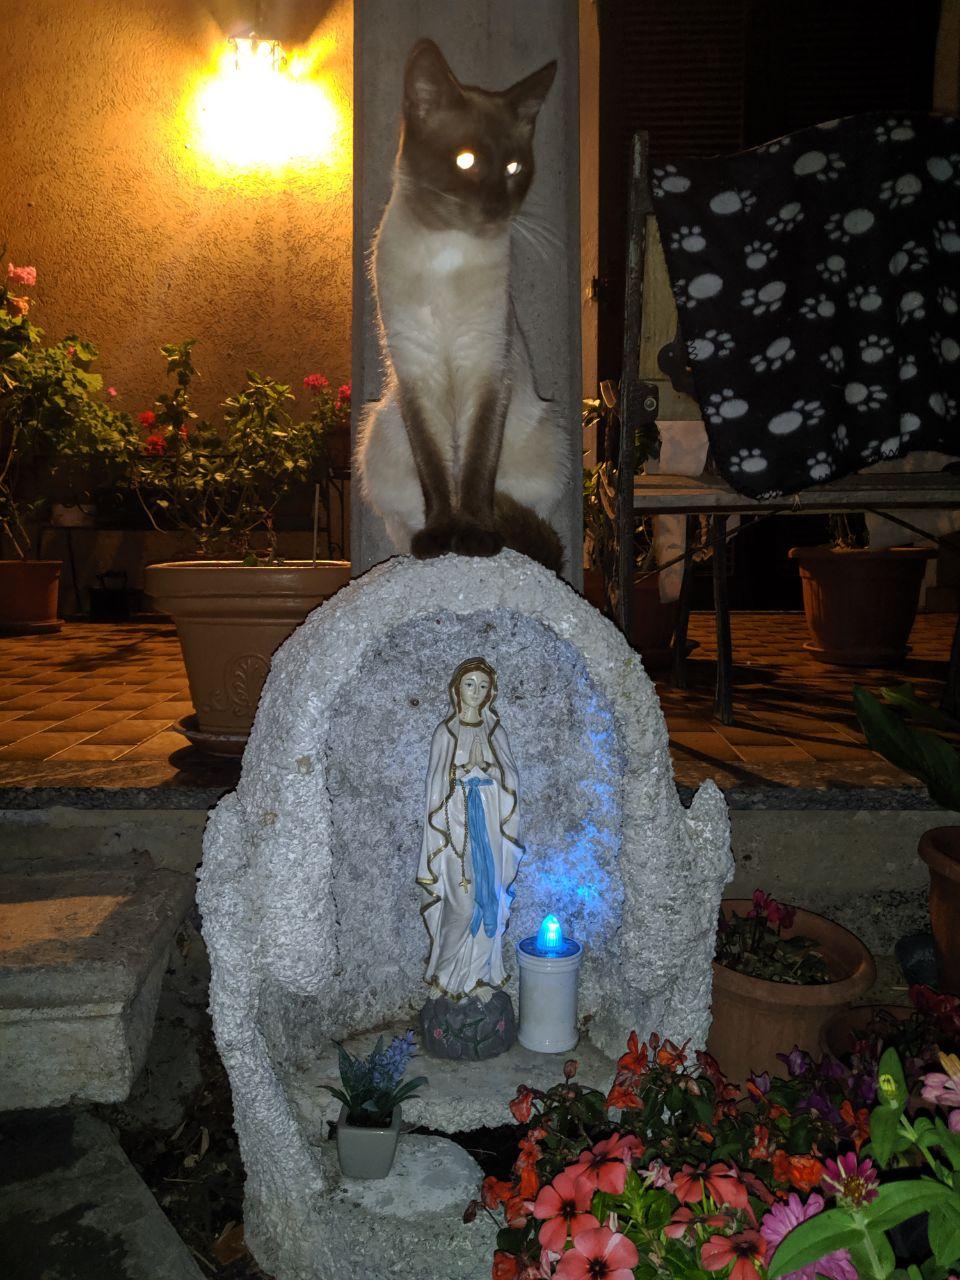 Another male cat, Frederico, being blessed and beloved